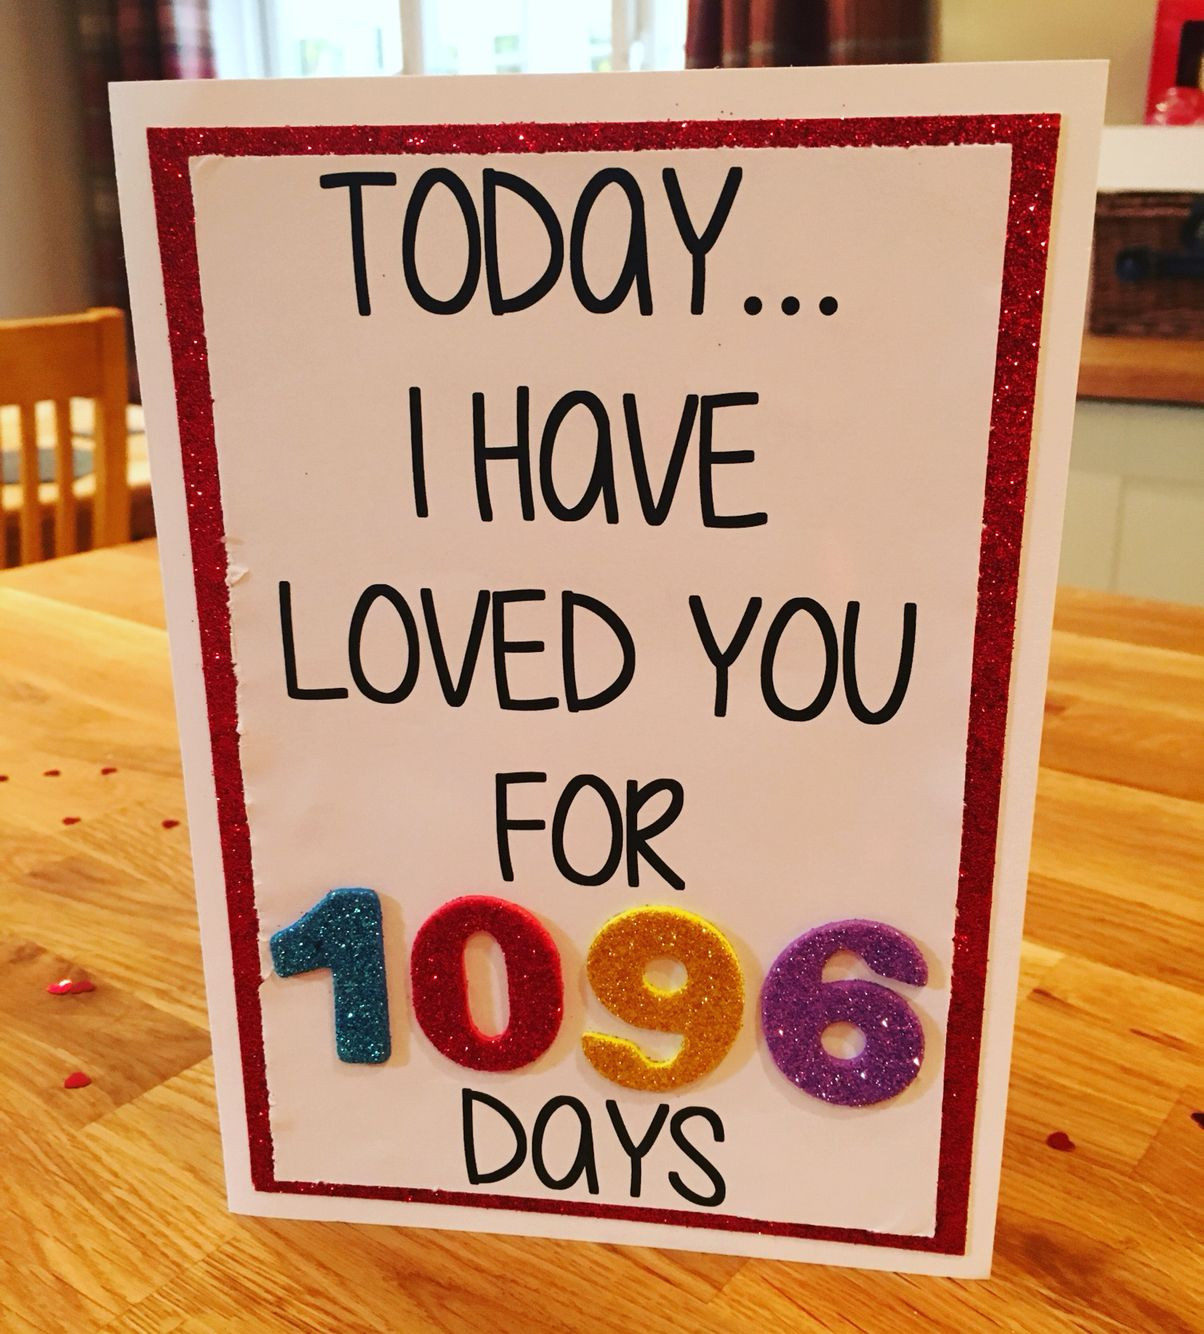 3 Year Dating Anniversary Gift Ideas For Him
 3 year anniversary card Today I have loved you for 1096